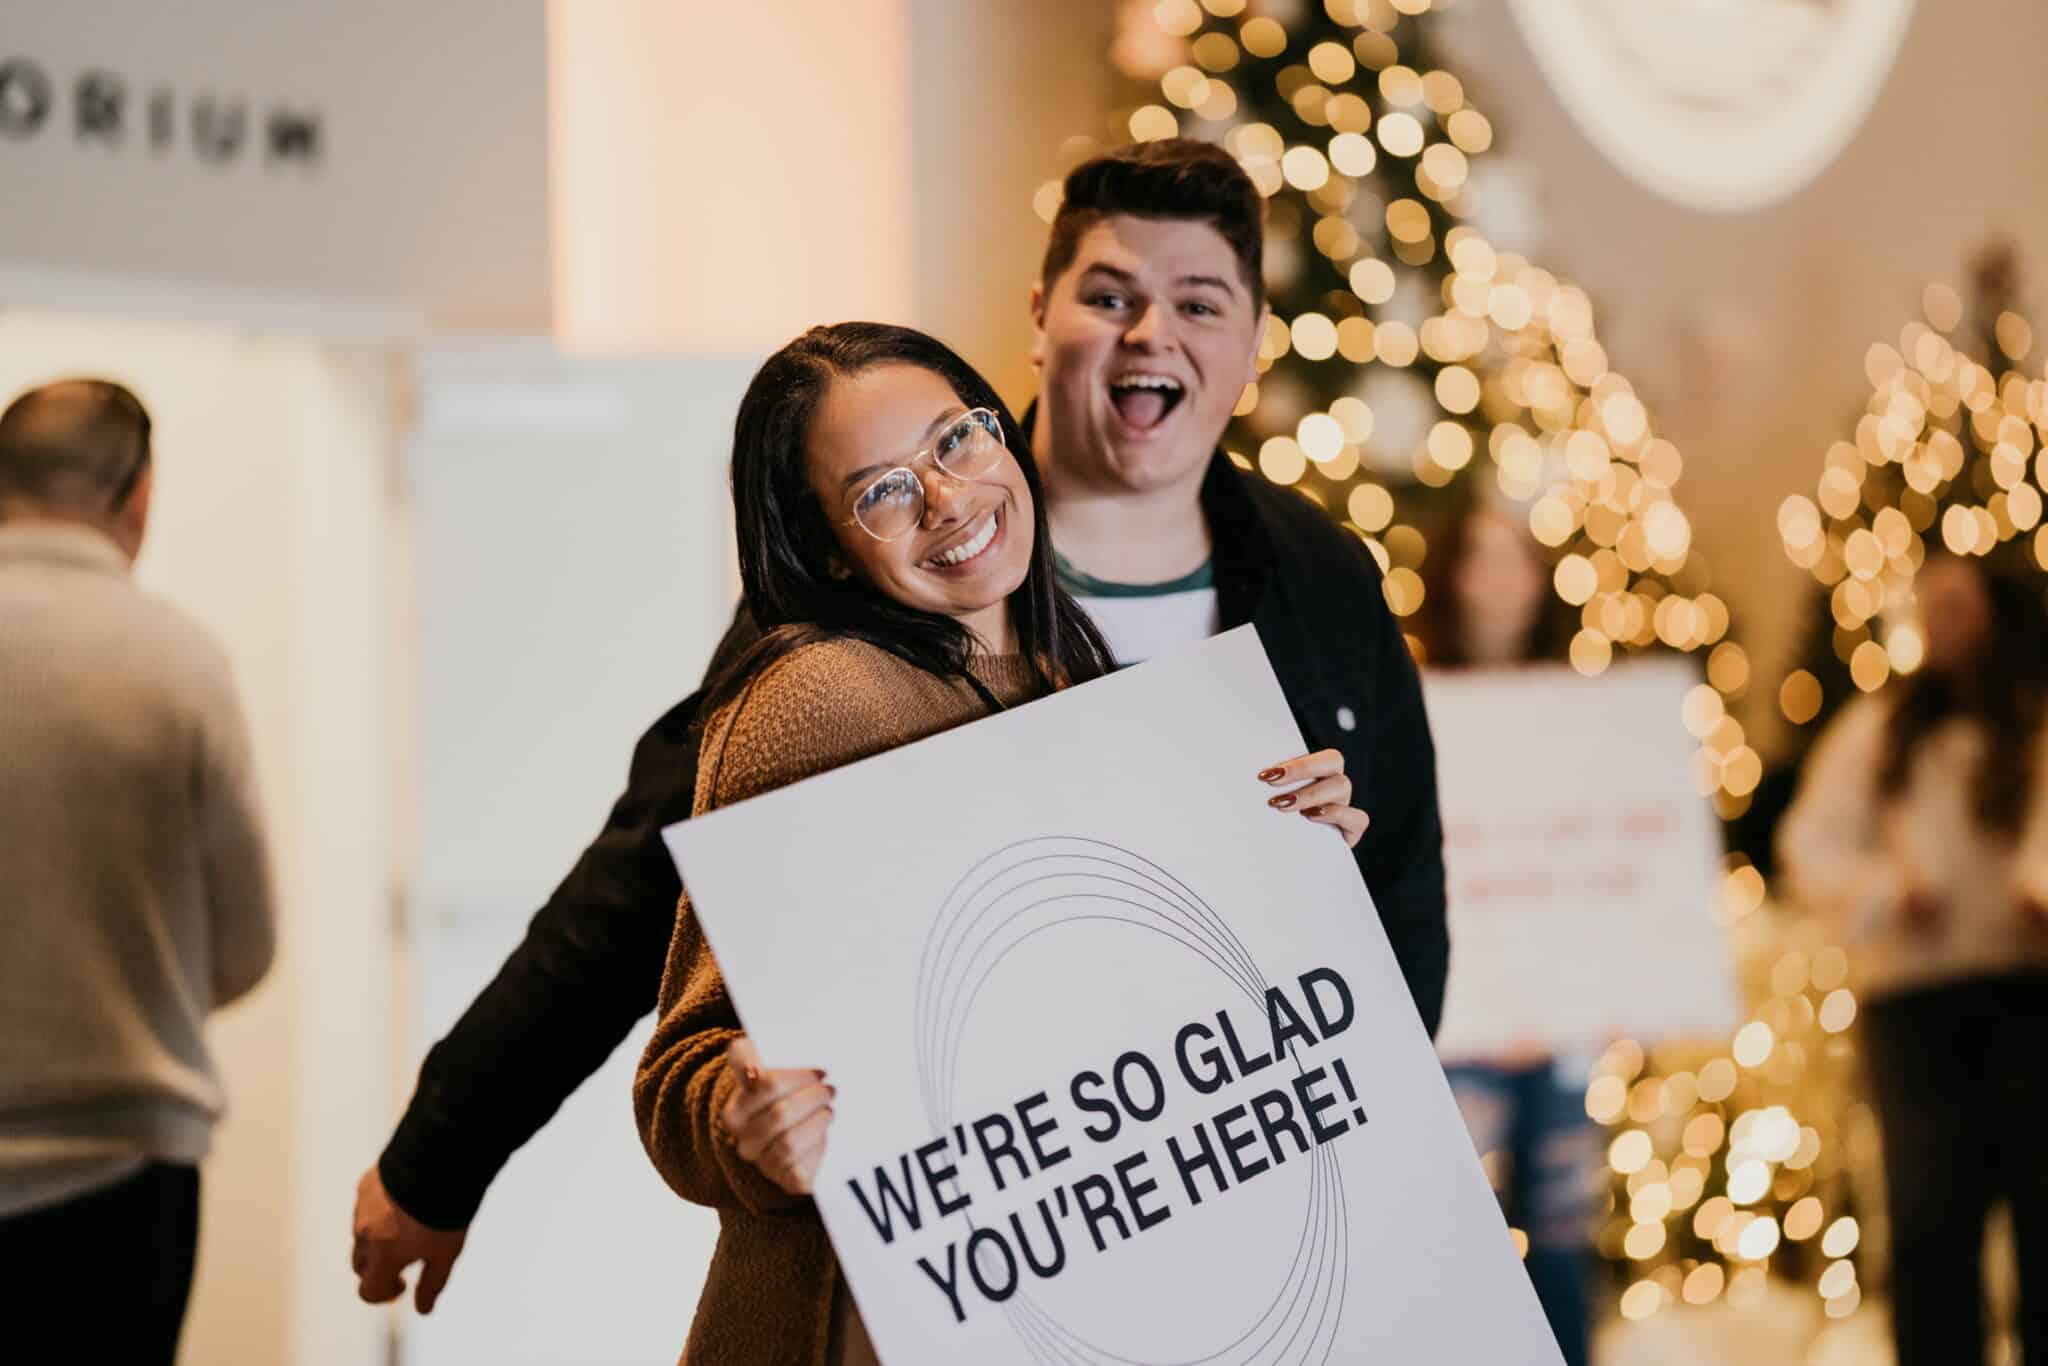 woman holding a sign that says we're so glad you're here smiles while man has goofy smile behind her